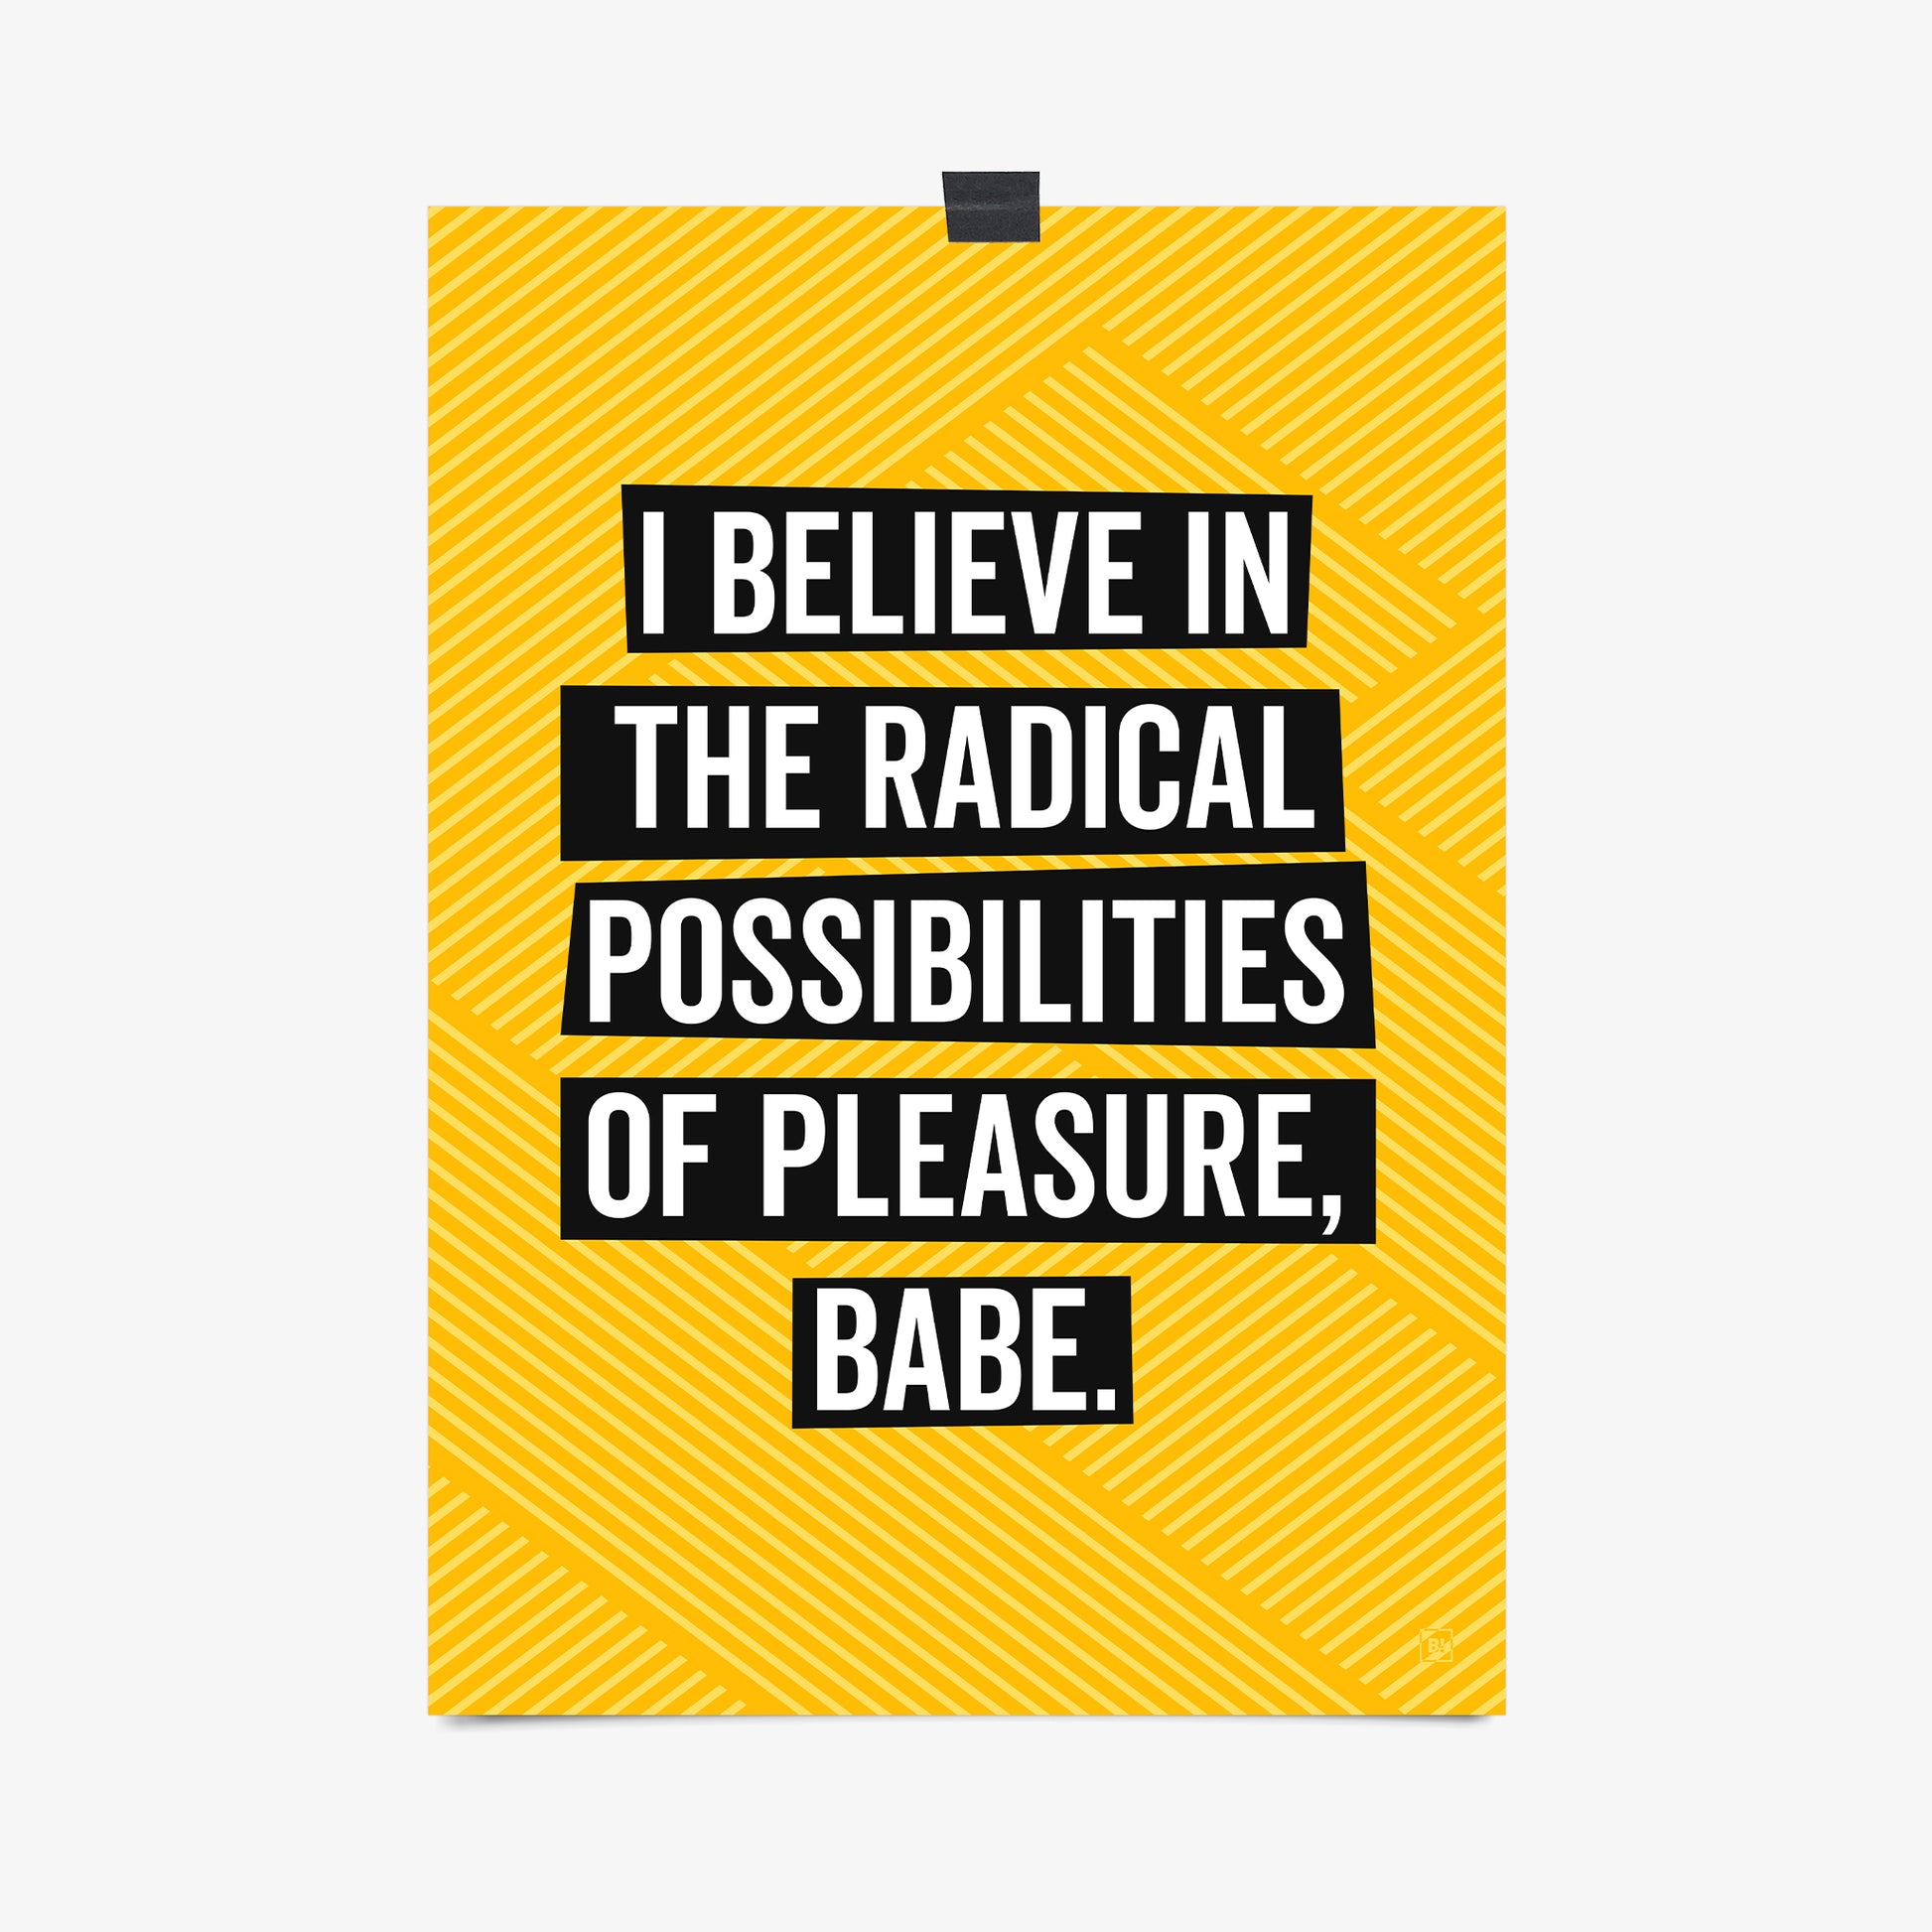 Be inspired by our golden yellow Bikini Kill "I Believe in the Radical Possibilities of Pleasure Babe" lyrics art print! This artwork was printed using the giclée process on archival acid-free paper, capturing its timeless beauty in every detail.